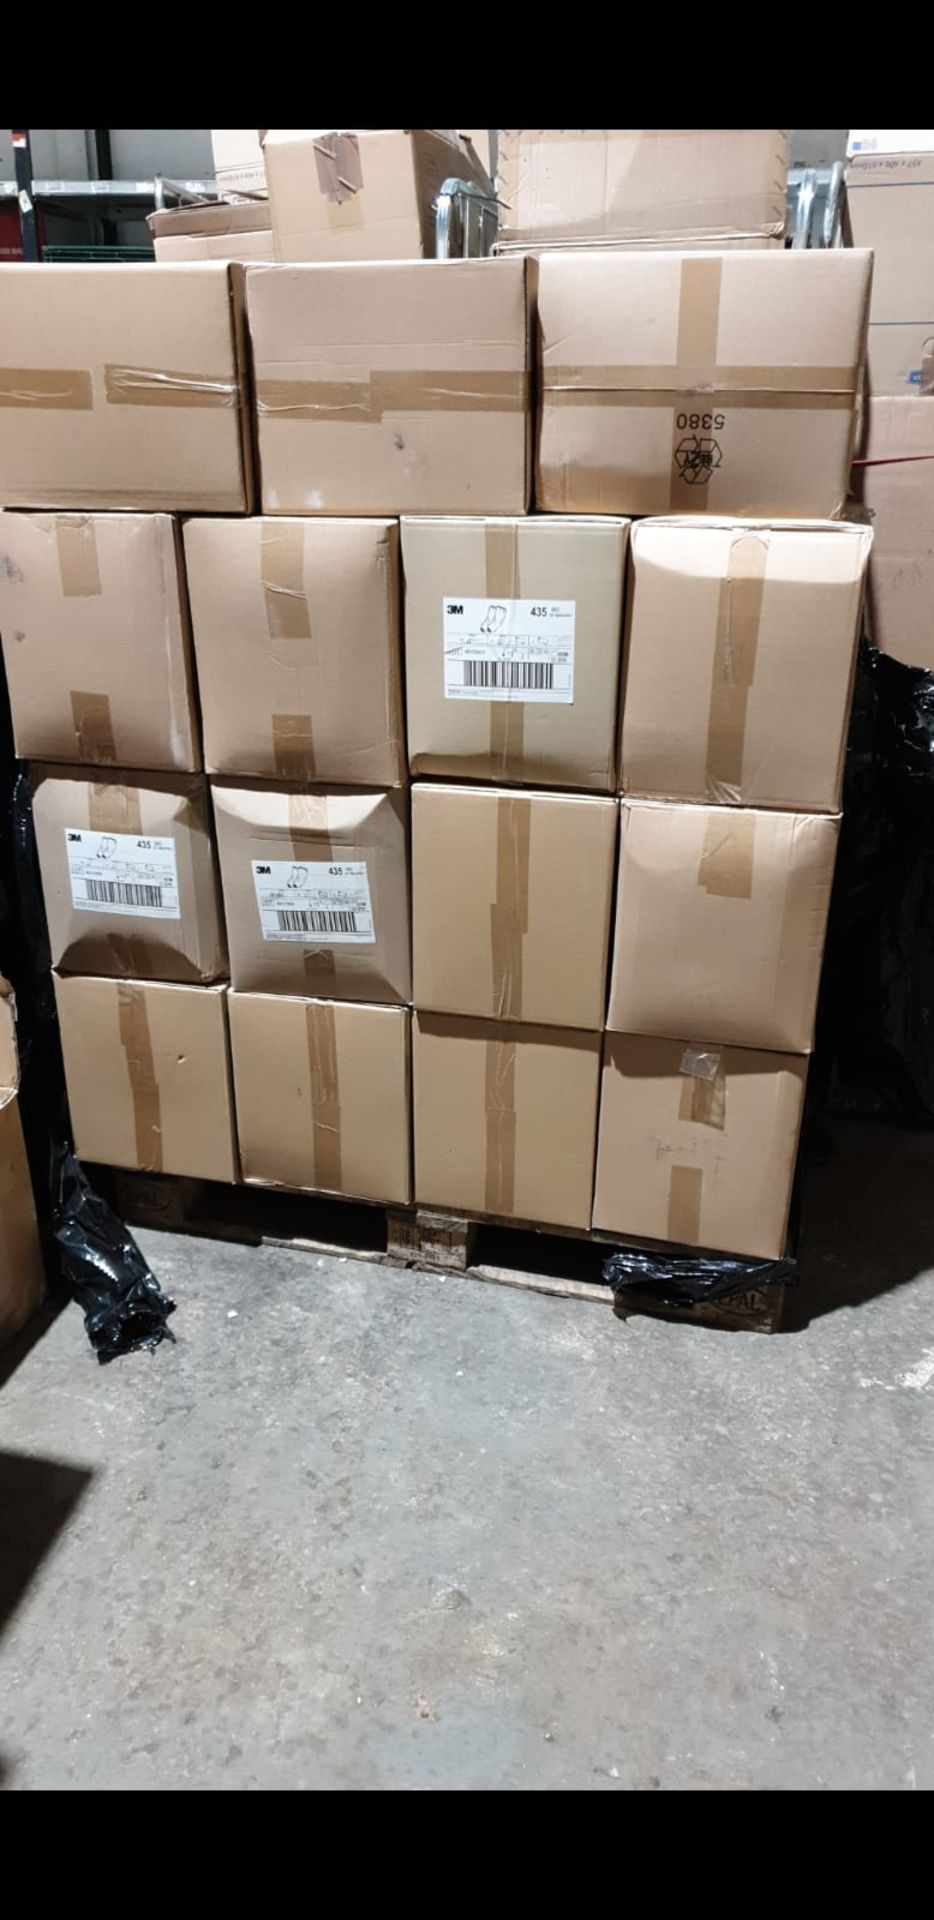 Full Pallet of 3M Oversleeve Protection, Vets, Catering, DIY